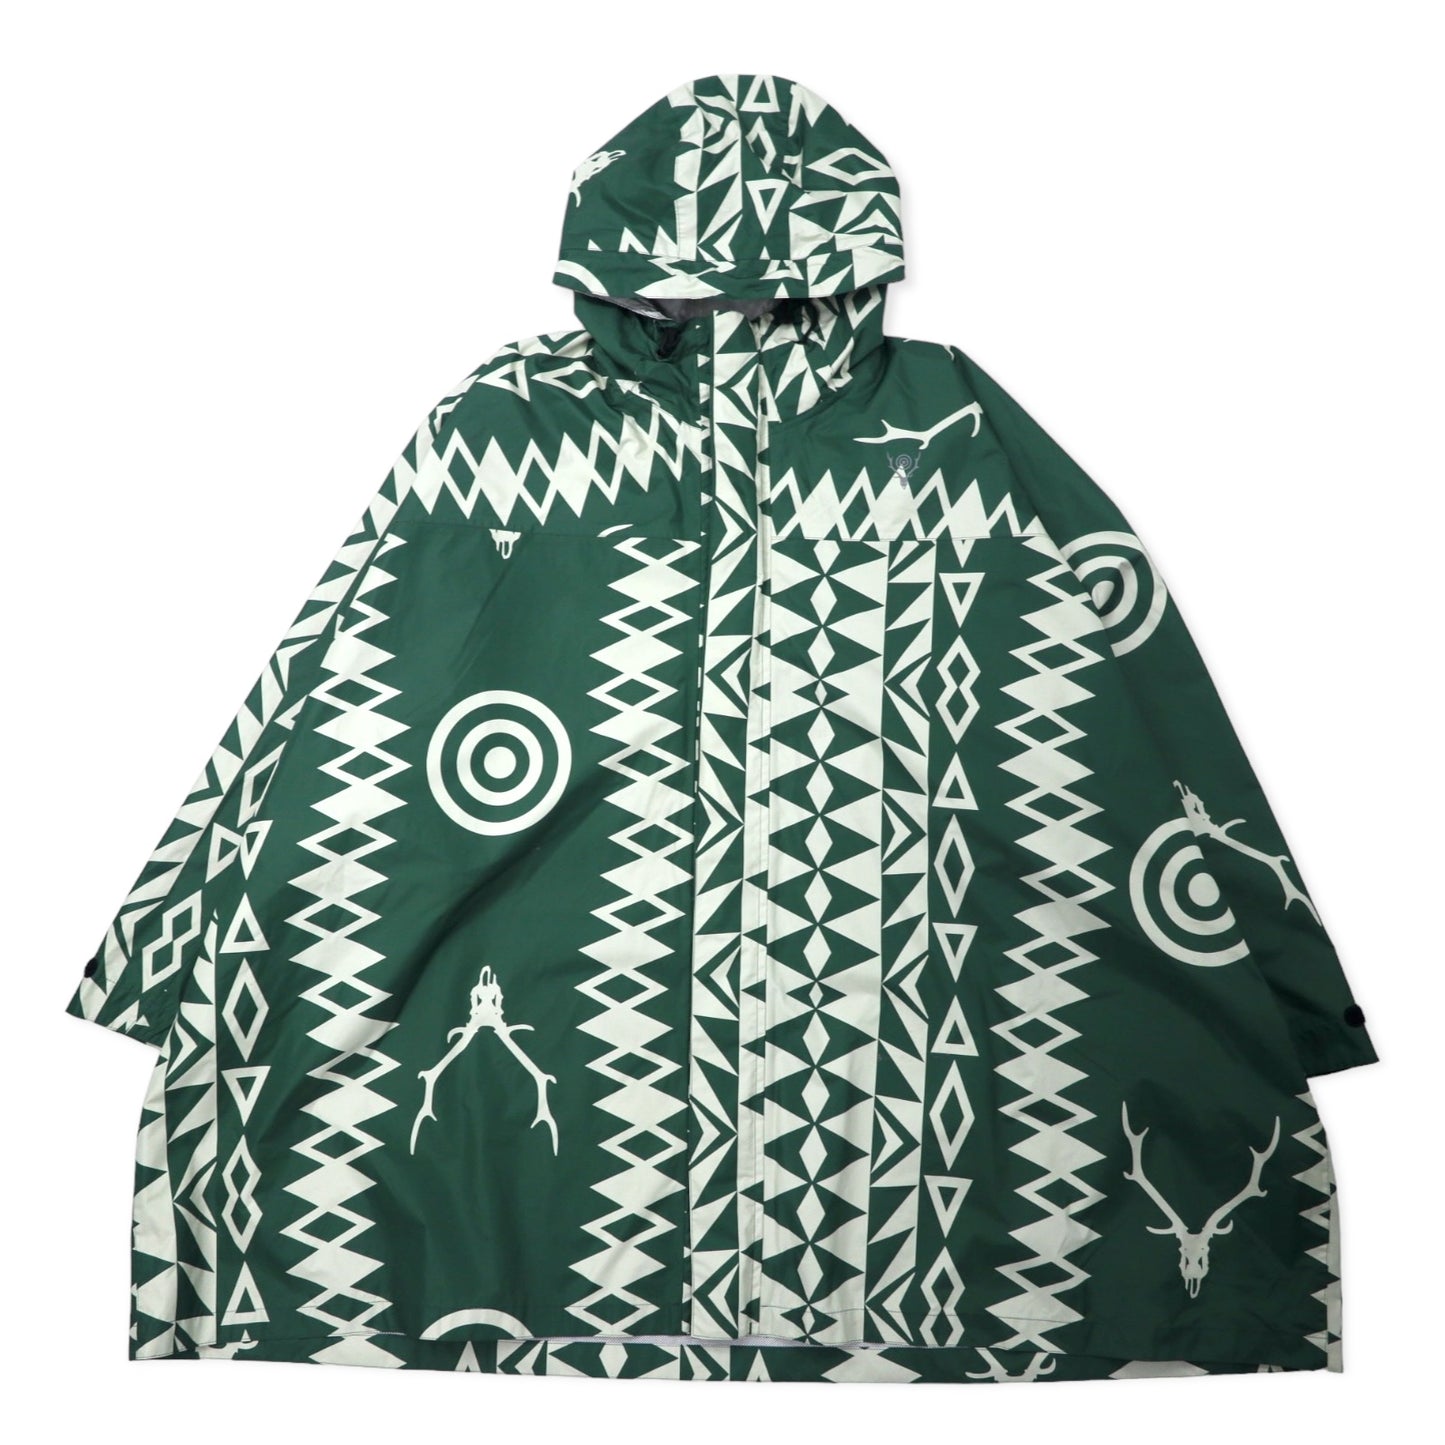 SOUTH2 WEST8 Poncho Mountain HOODIE M Khaki Patterned Polyester 